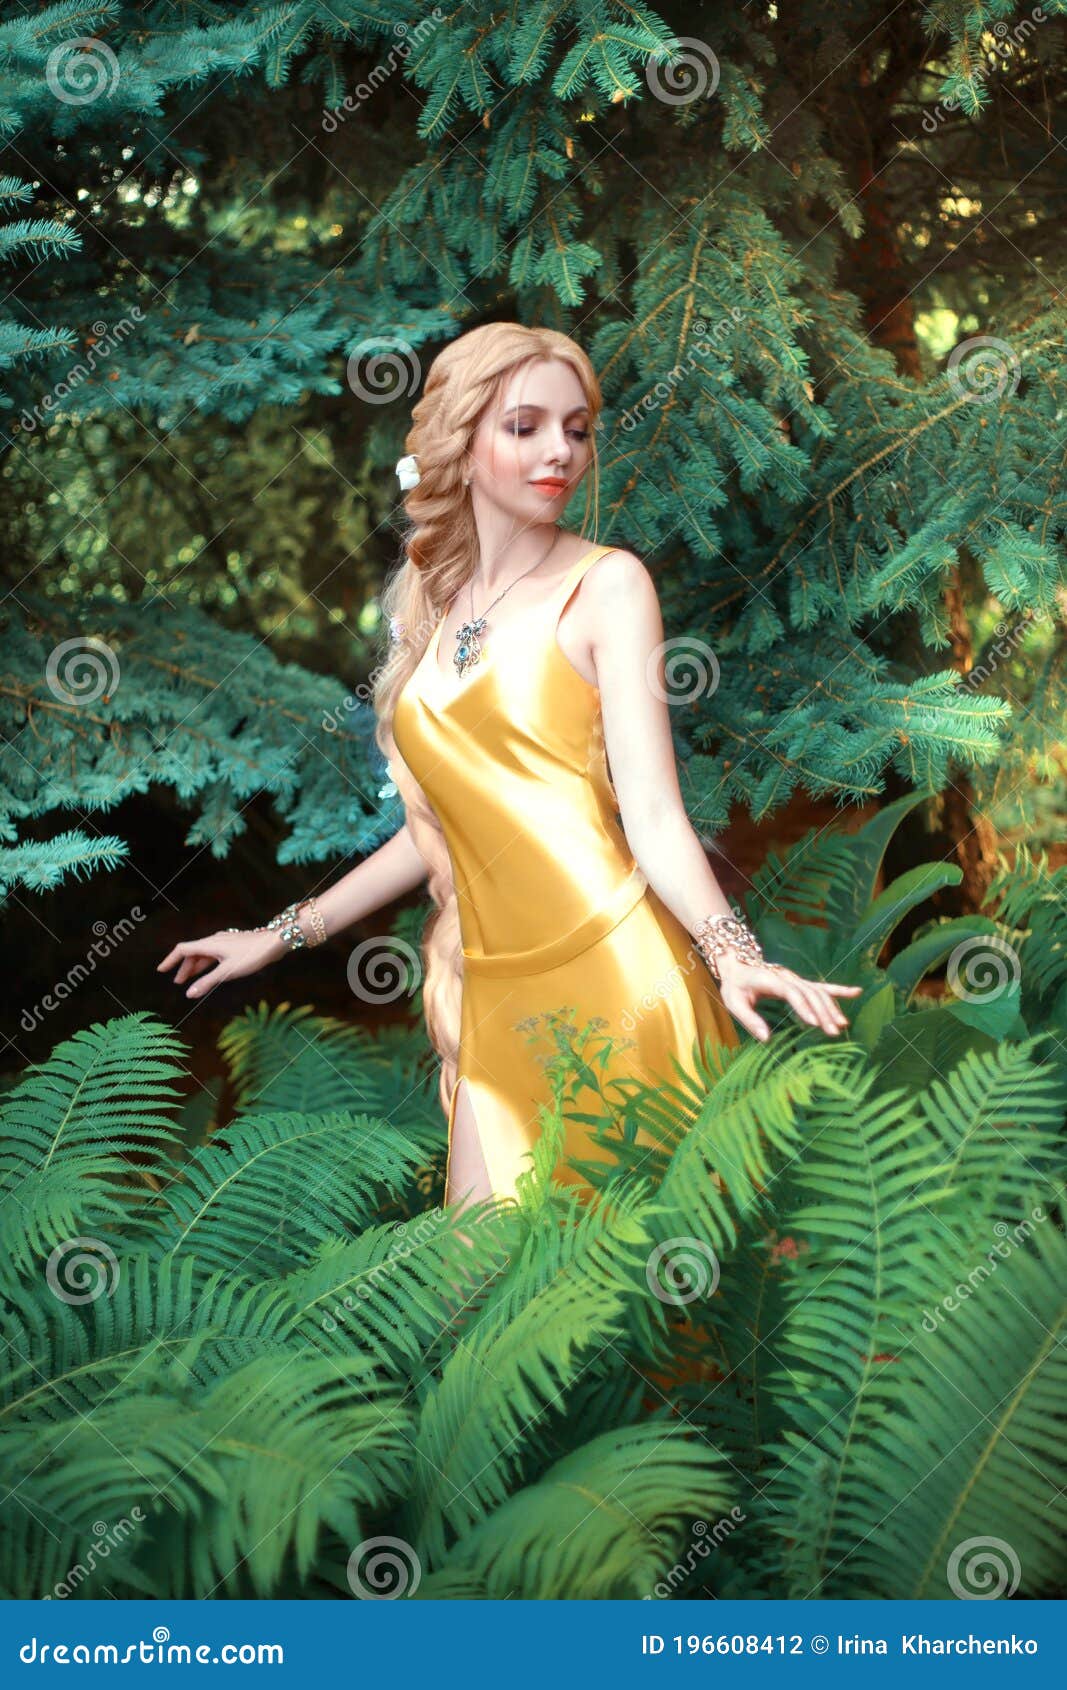 beautiful young blond woman with very long hair that is braided. the girl is dressed in a seductive yellow dress